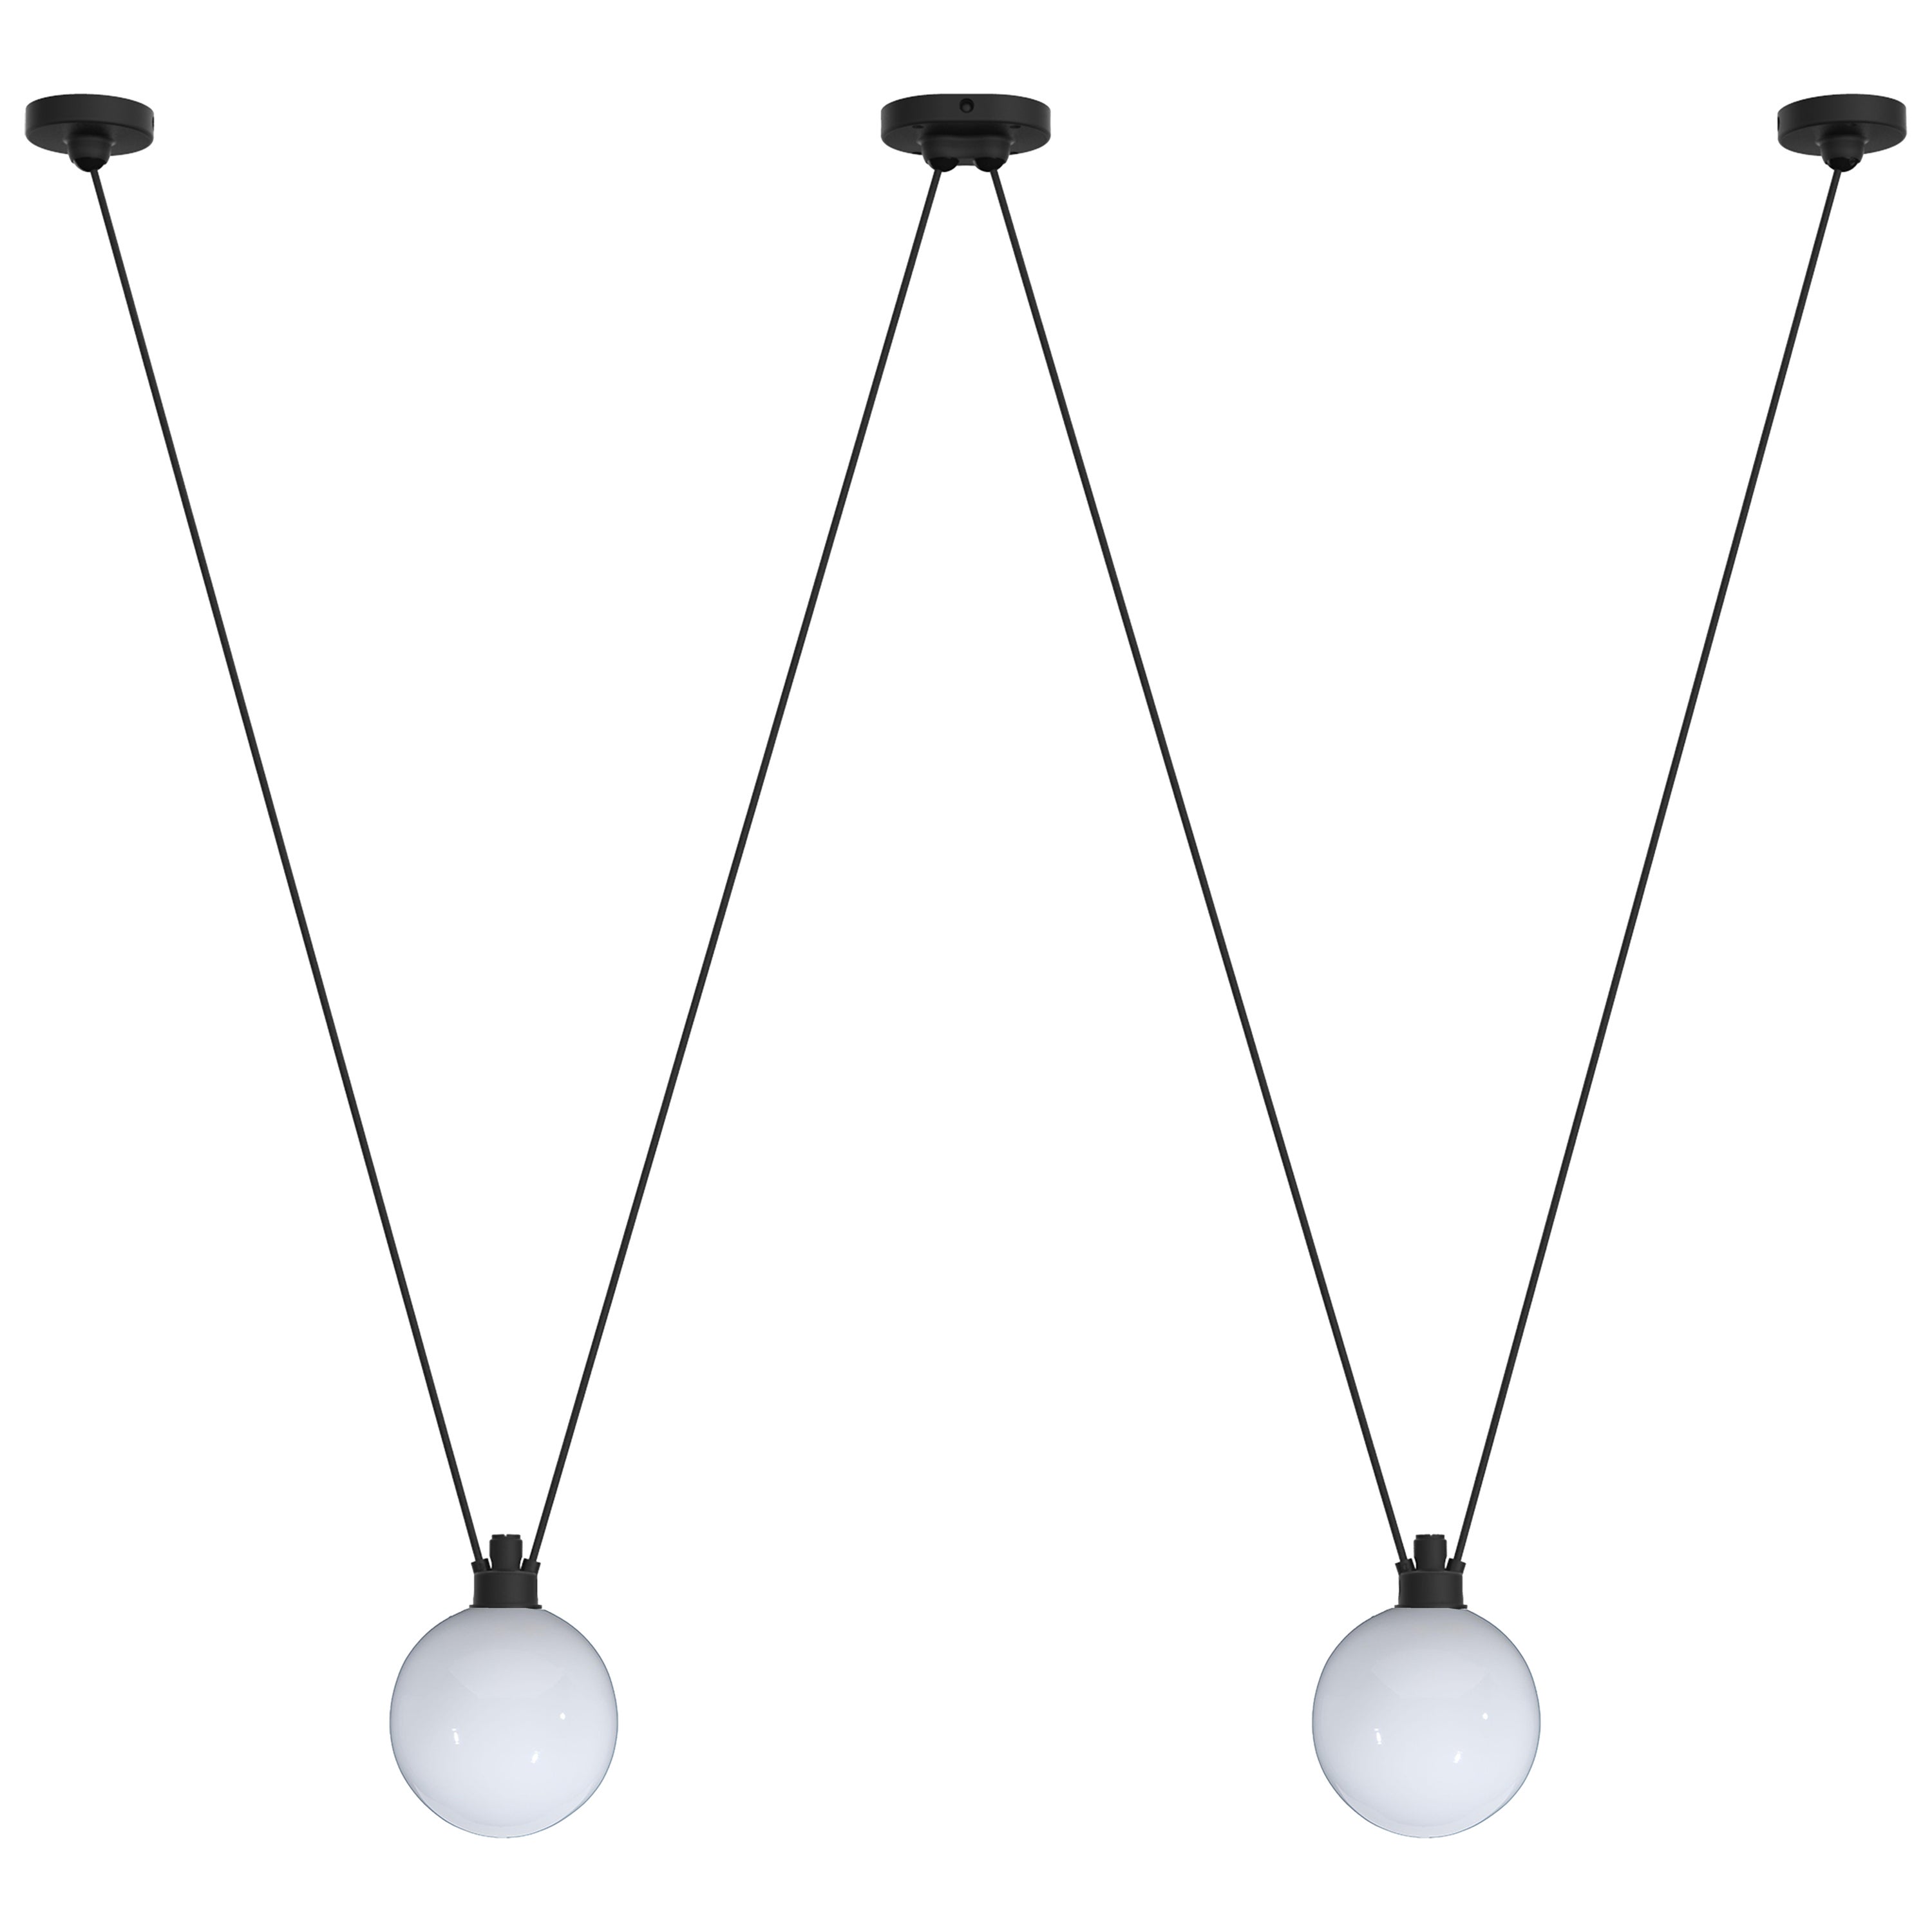 DCW Editions Les Acrobates N°324 Pendant Lamp in Black Arm and Small Glassball For Sale